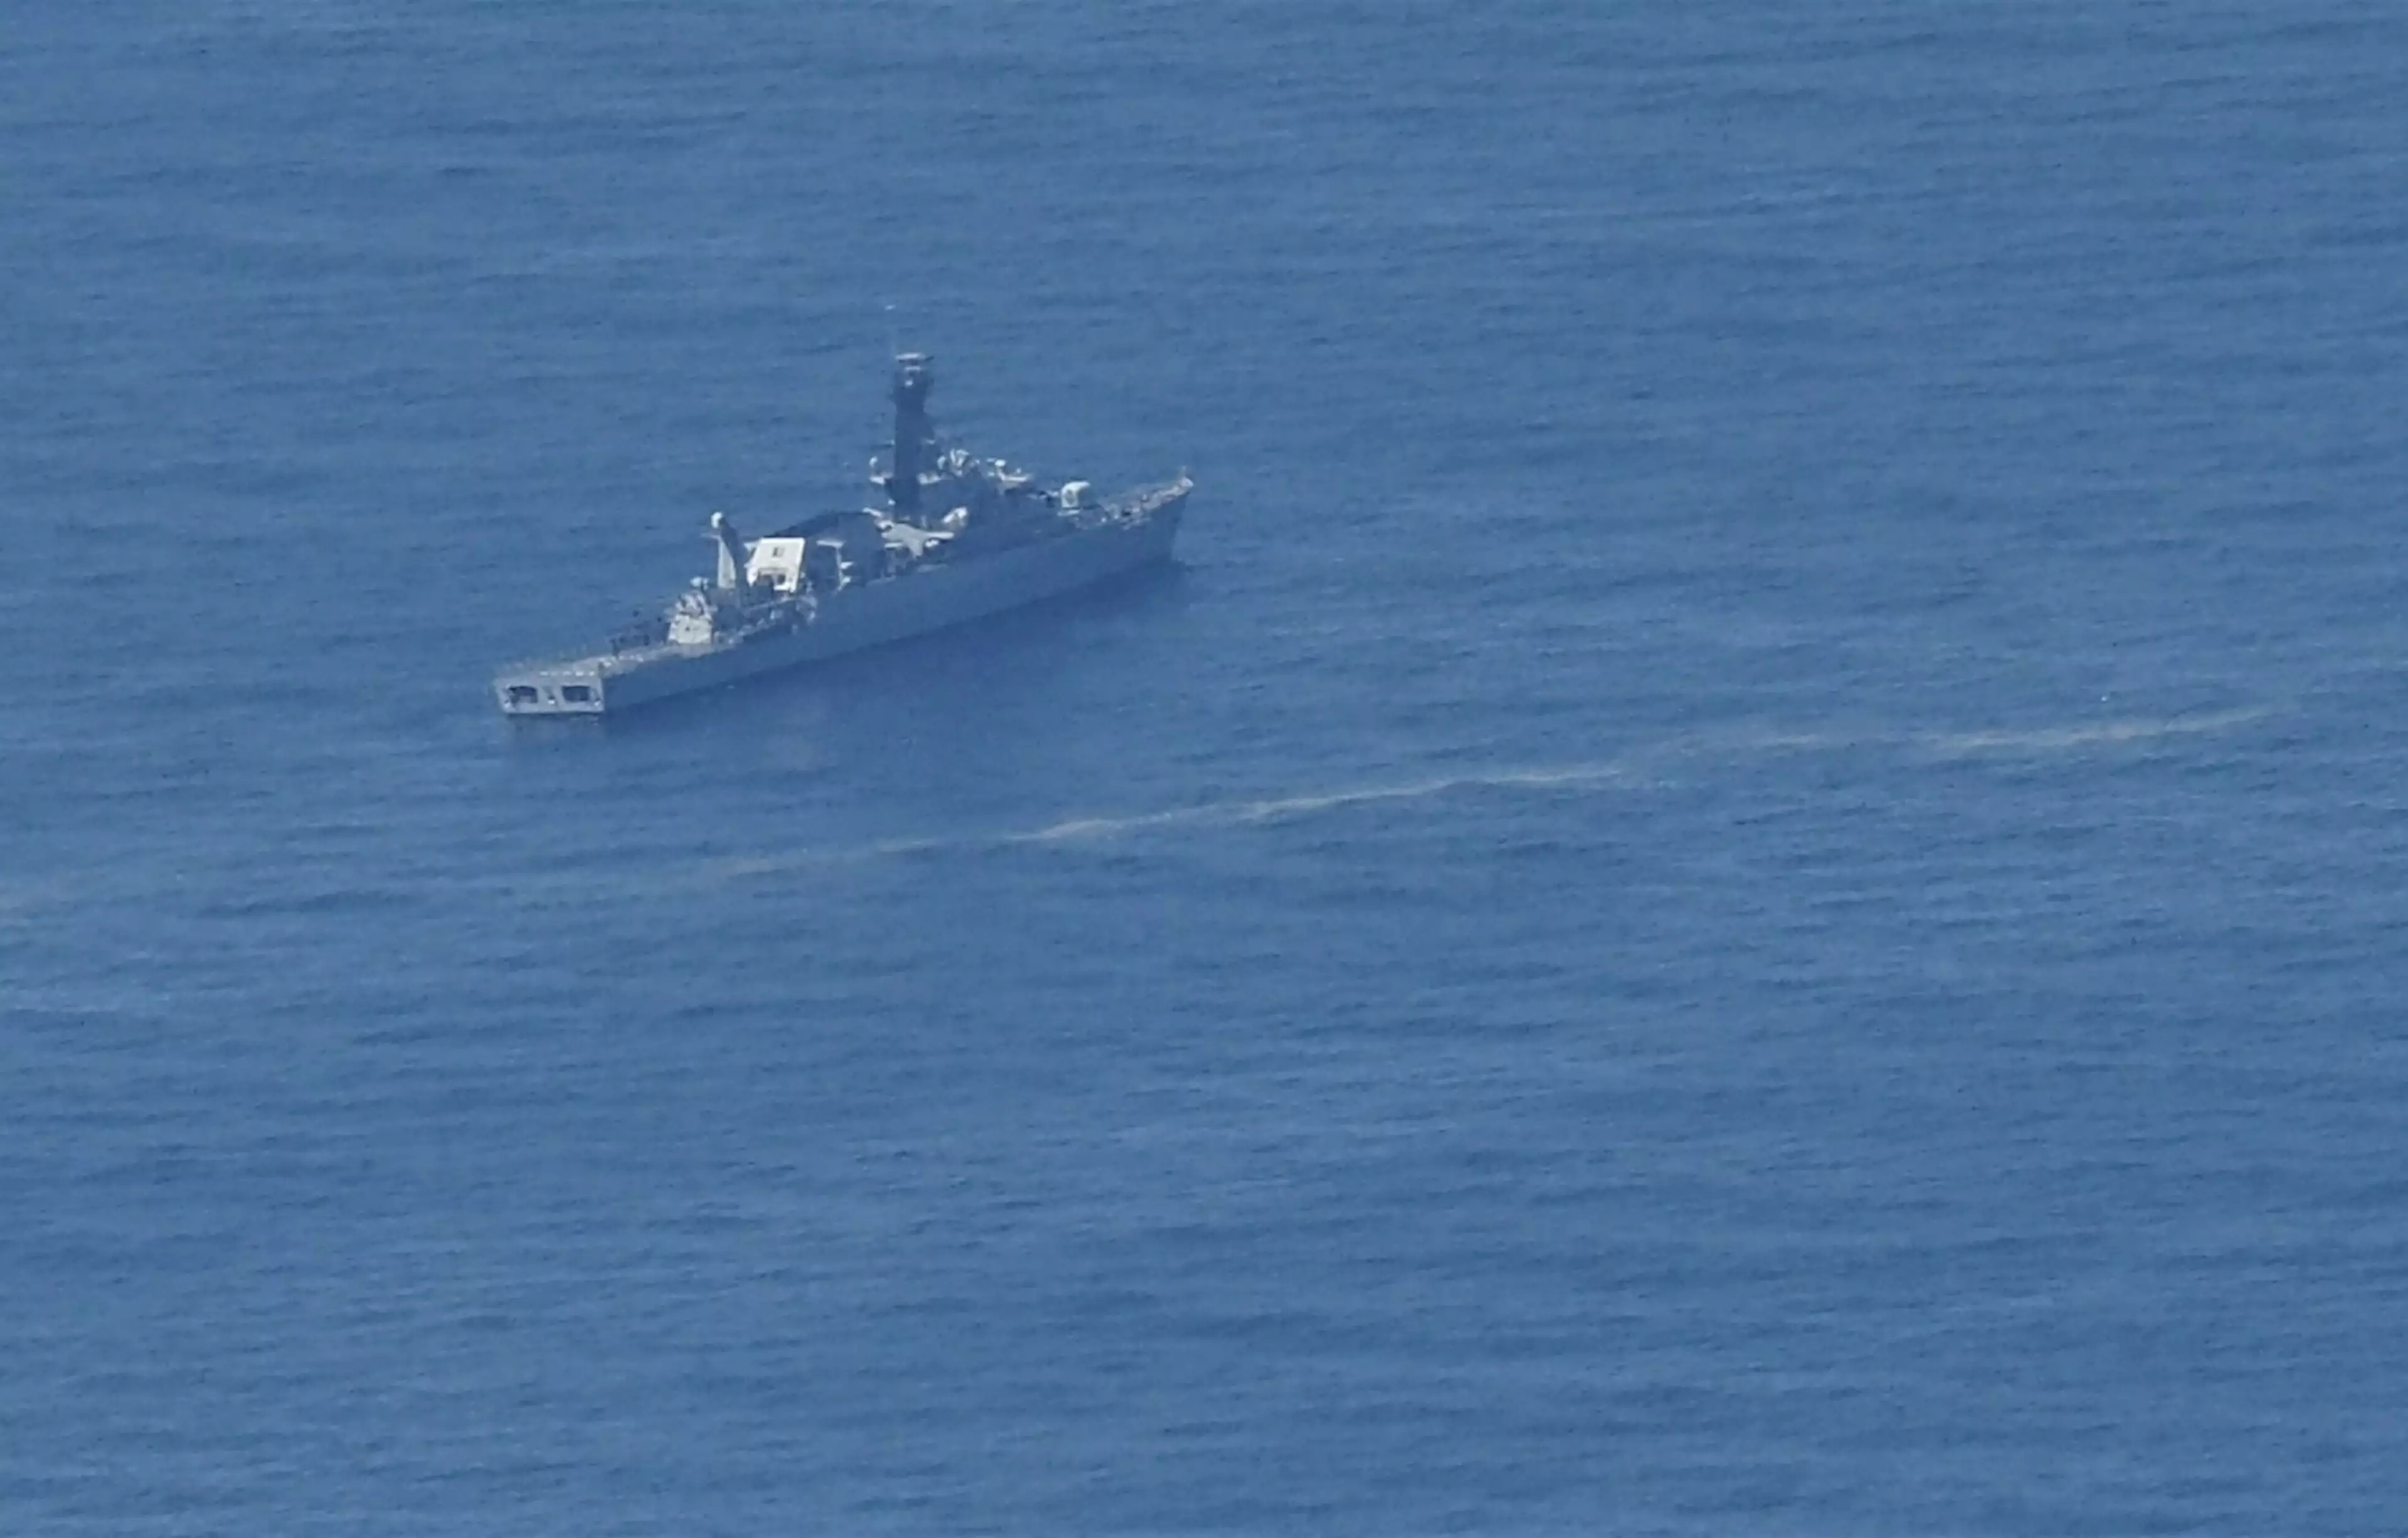 Navy ship searching for the missing submarine.